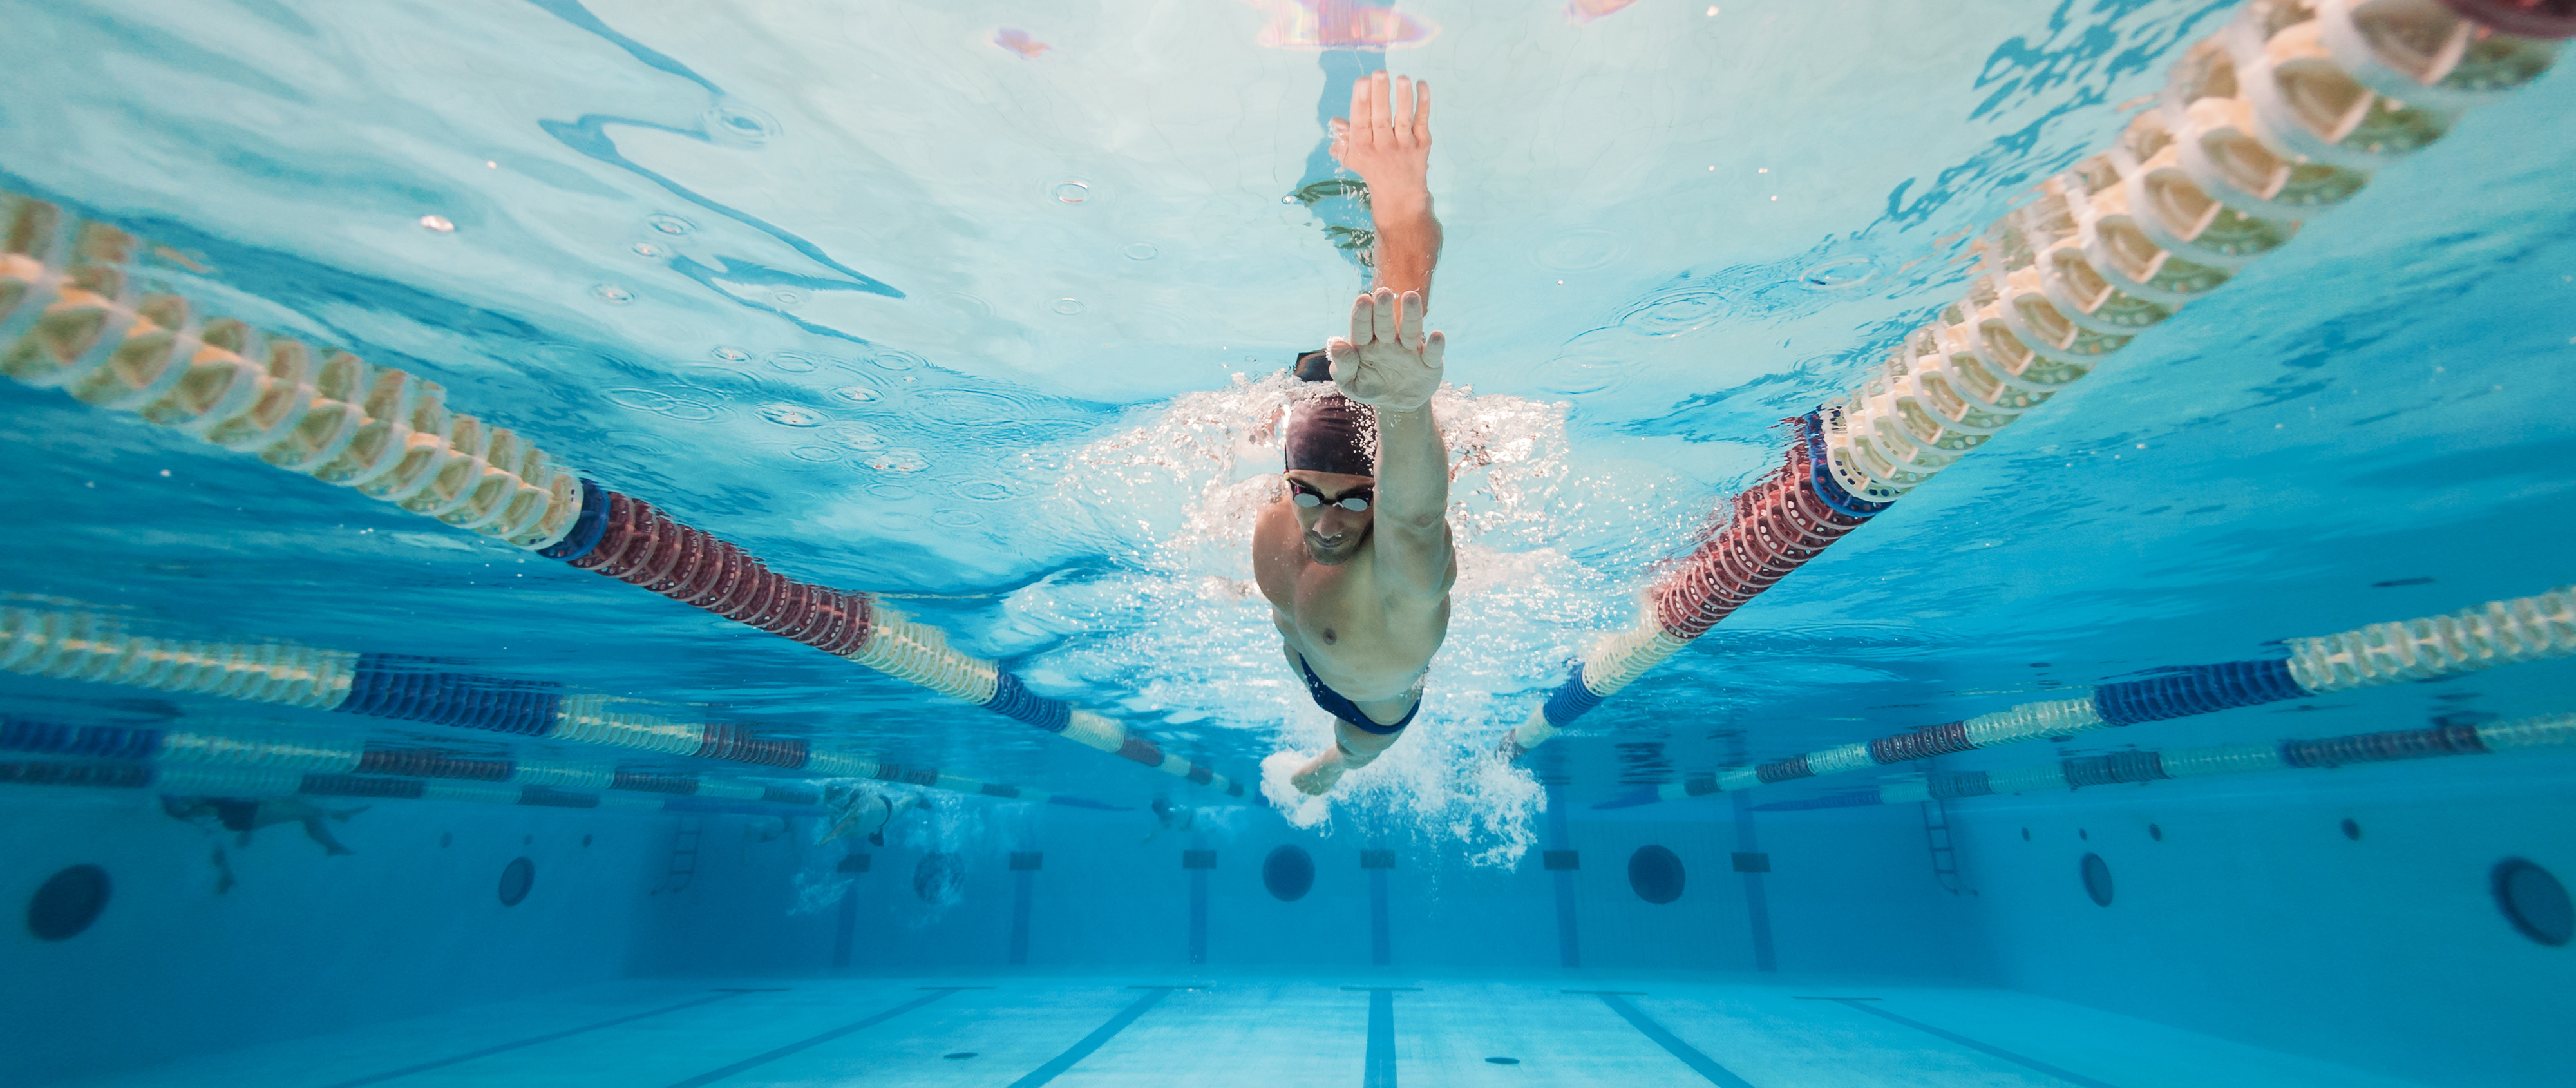 An image of a professional male swimmer doing laps in the pool.